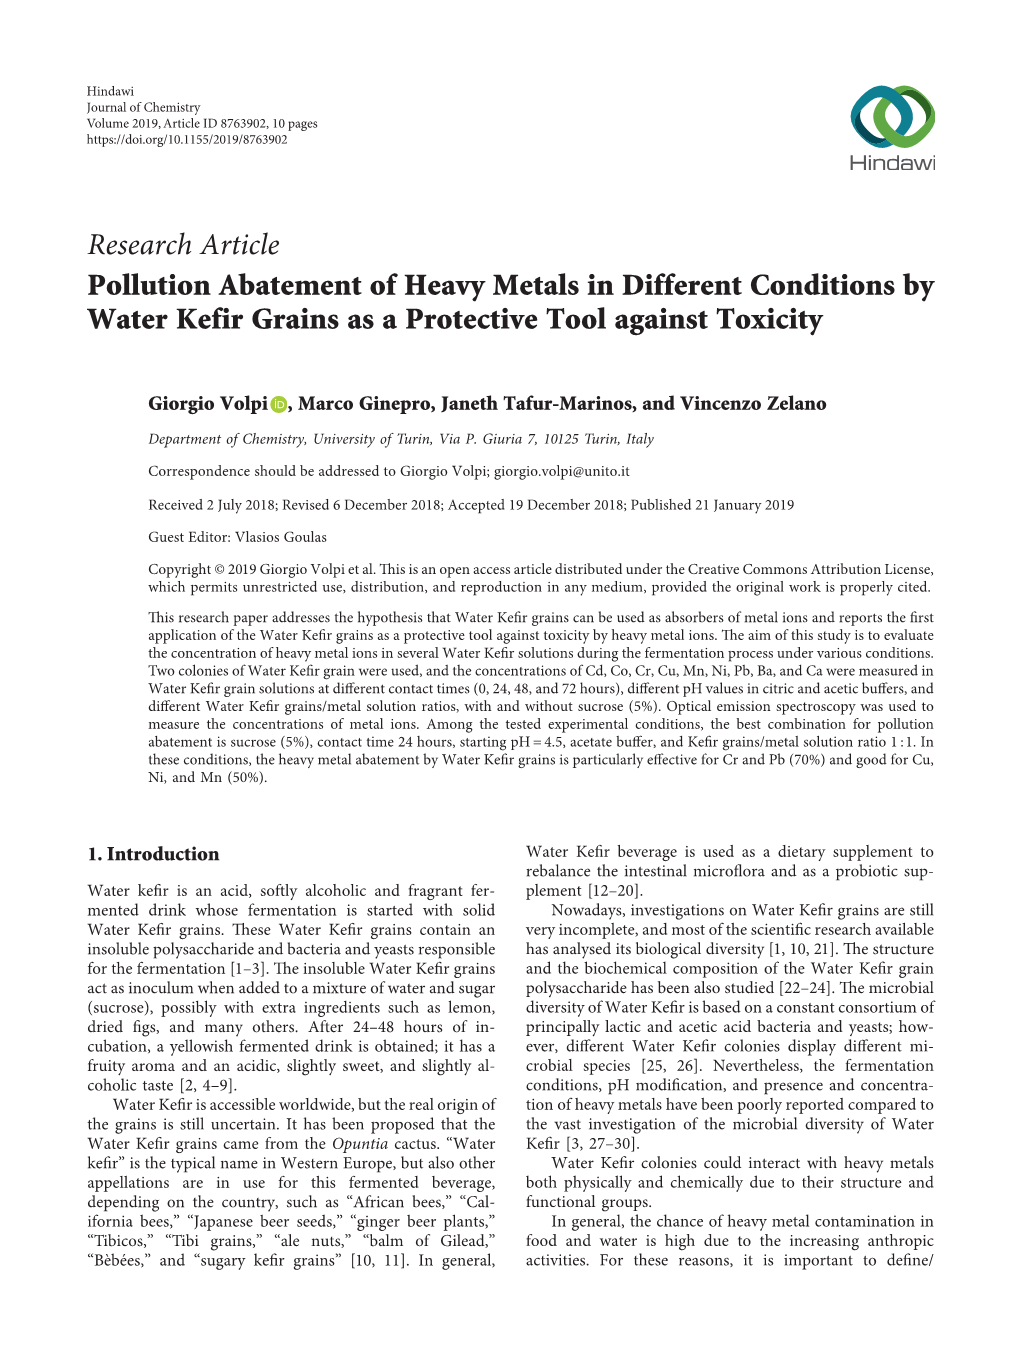 Pollution Abatement of Heavy Metals in Different Conditions by Water Kefir Grains As a Protective Tool Against Toxicity